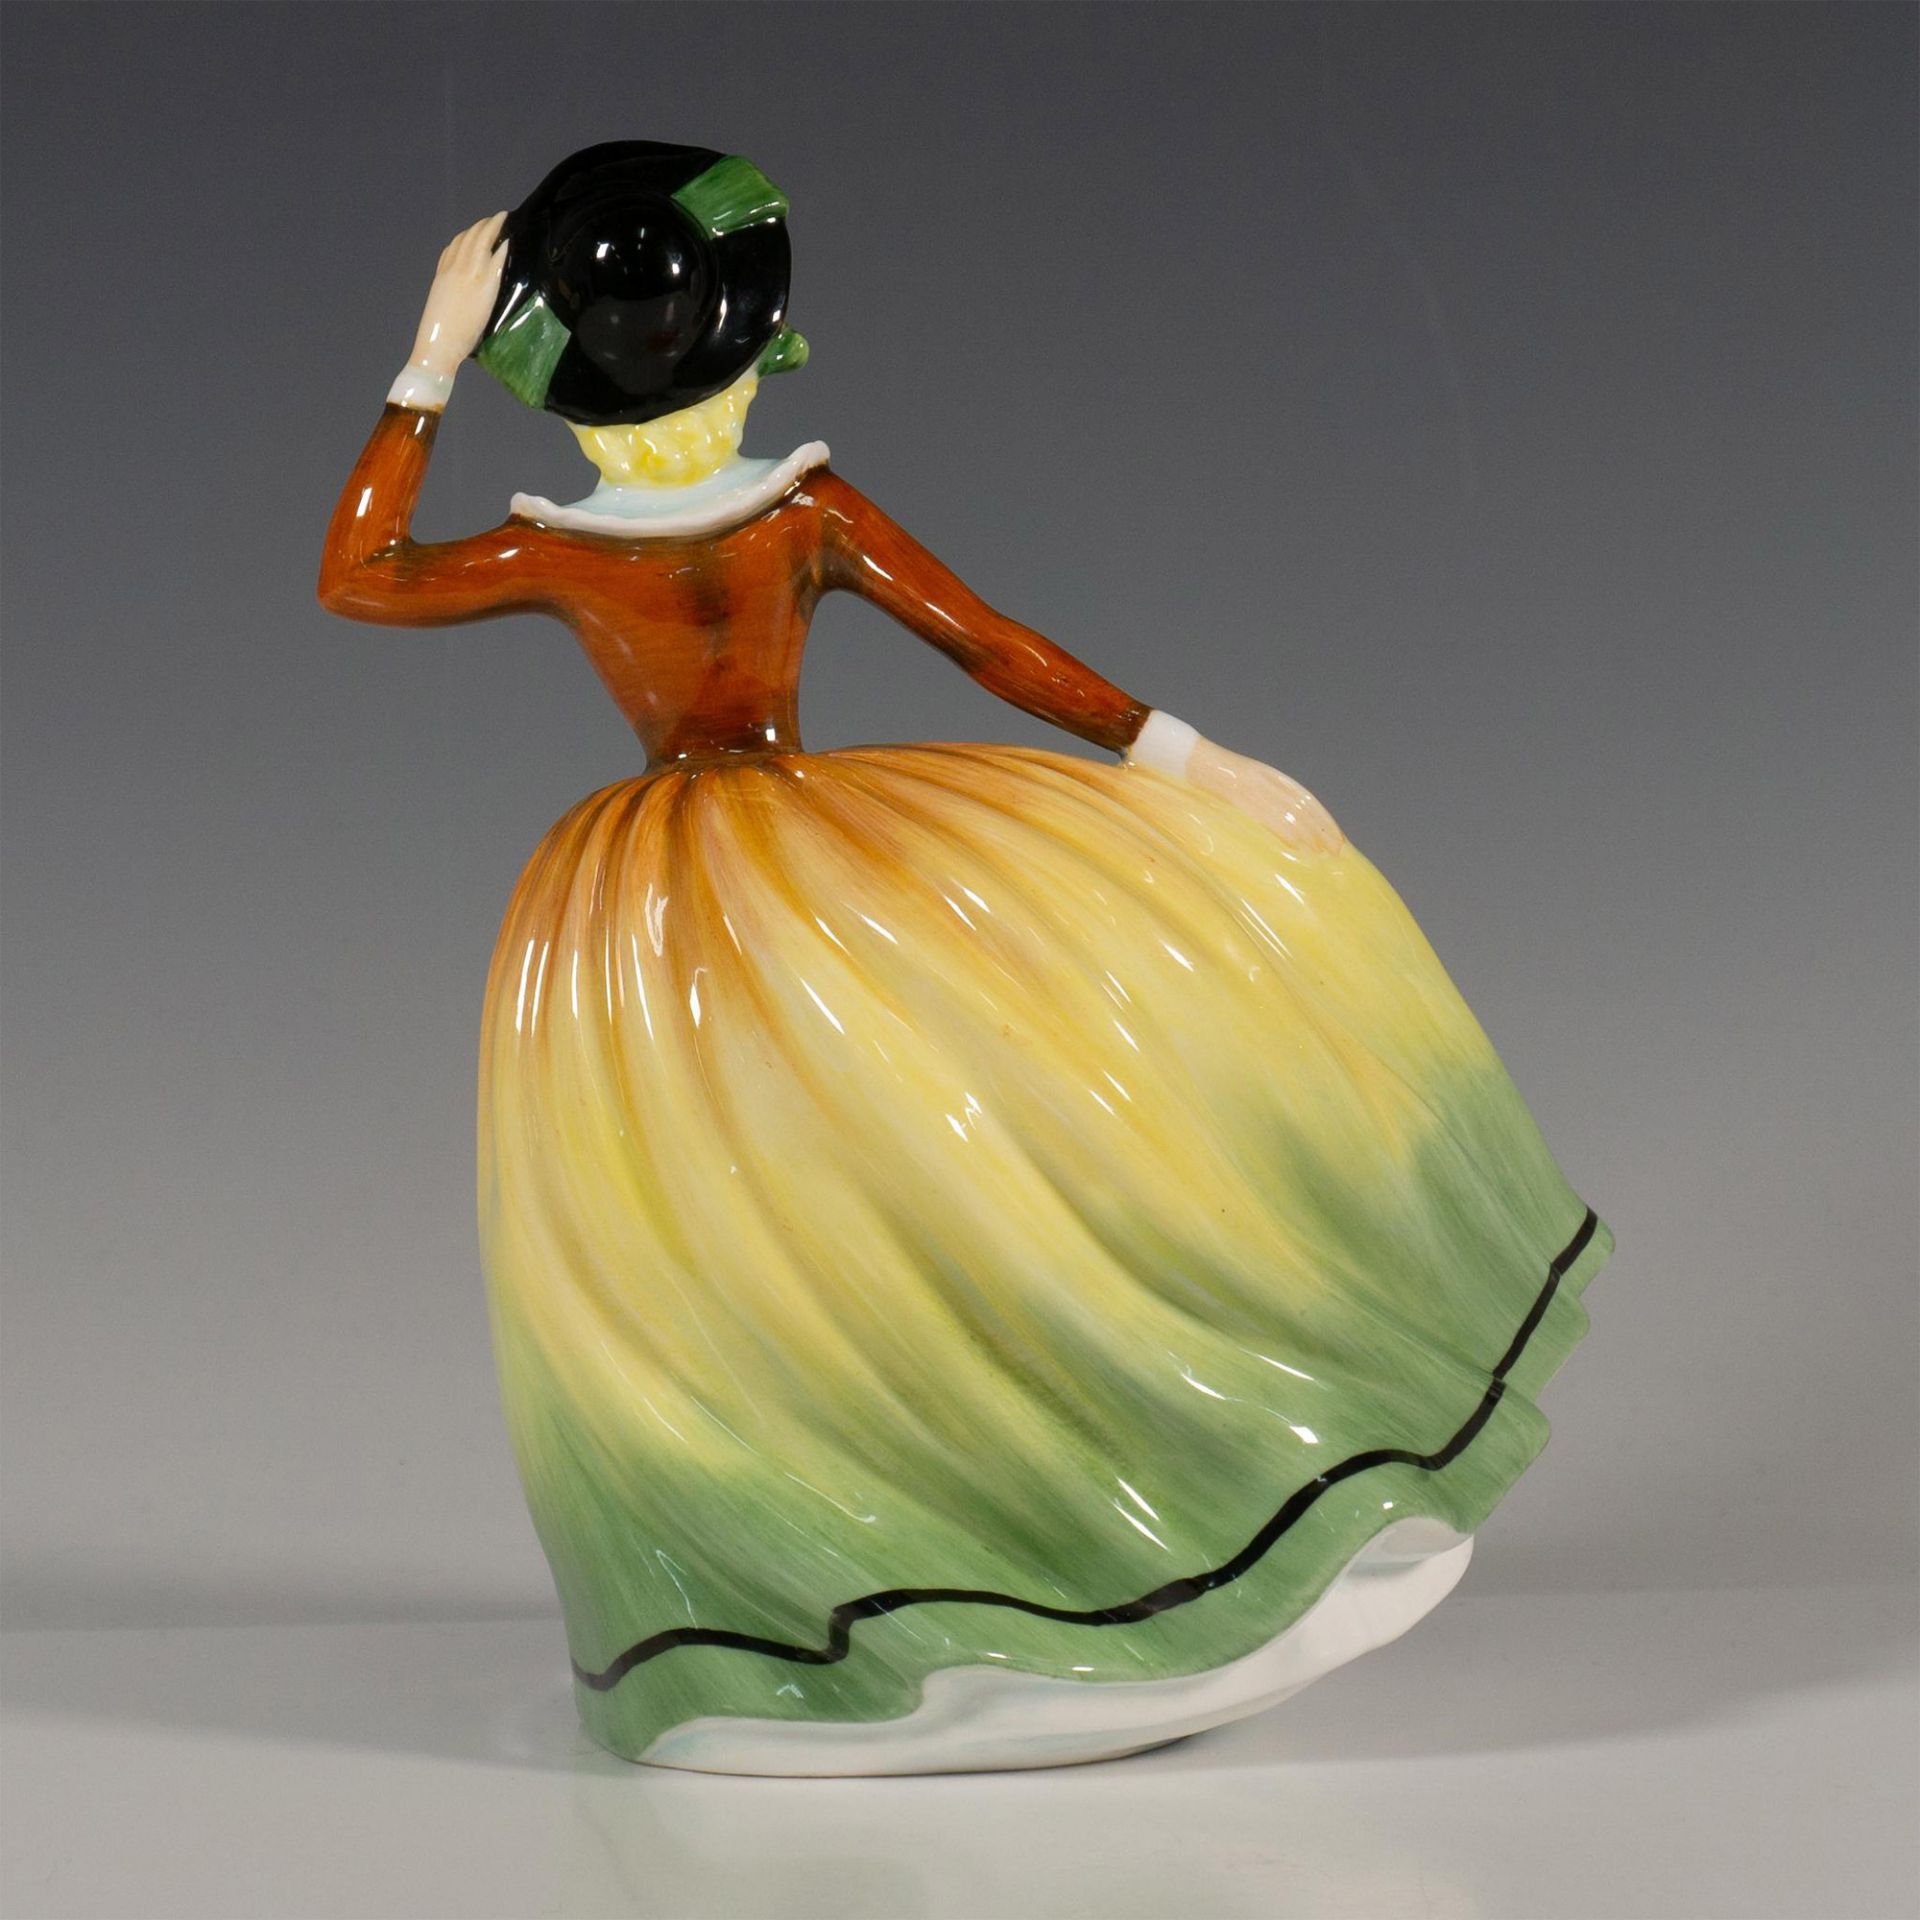 Mary HN3903, Colorway - Royal Doulton Figurine - Image 3 of 4